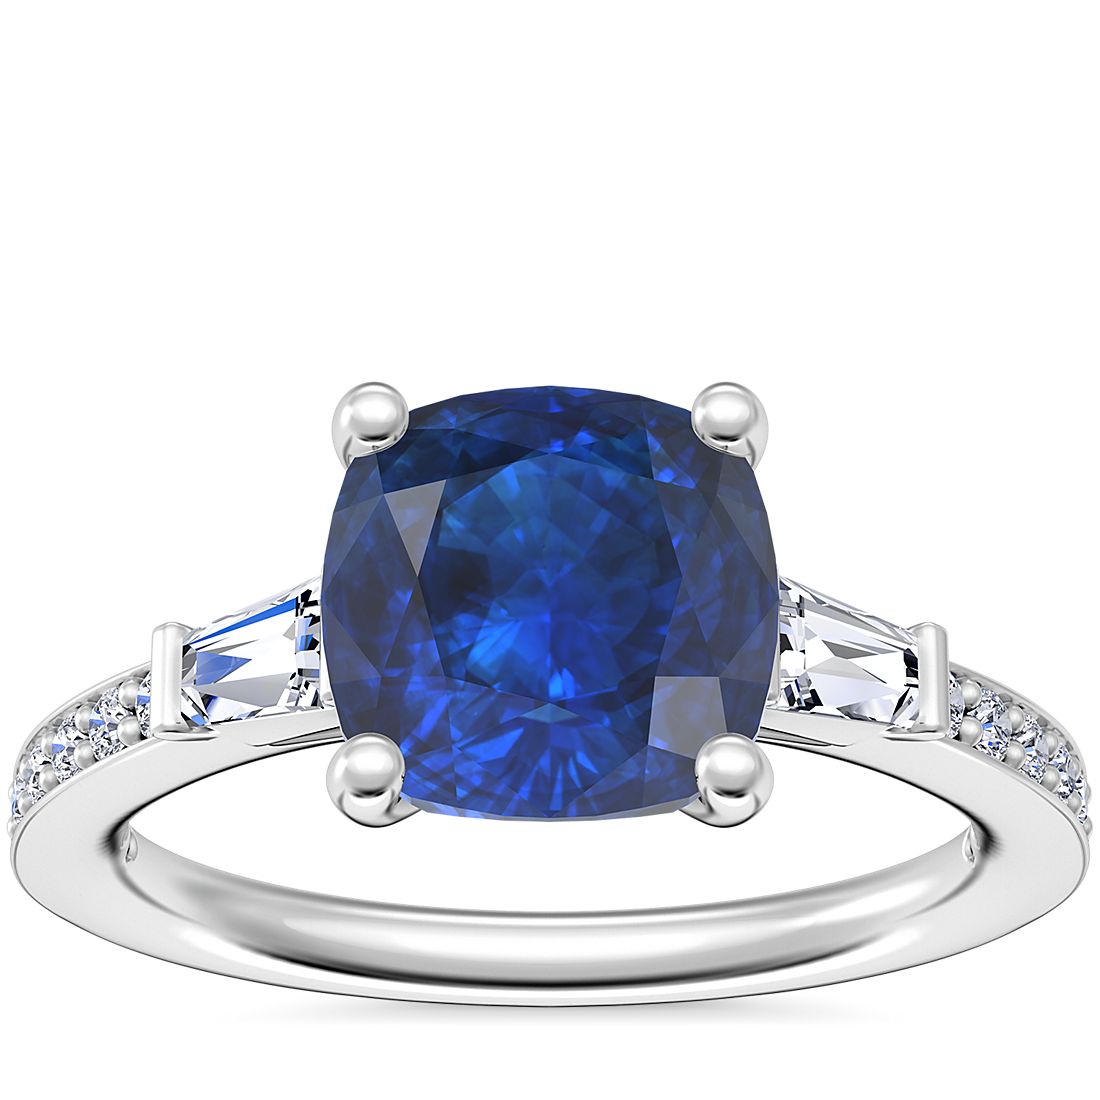 Tapered Baguette Diamond Cathedral Engagement Ring with Cushion Sapphire in Platinum (8mm)